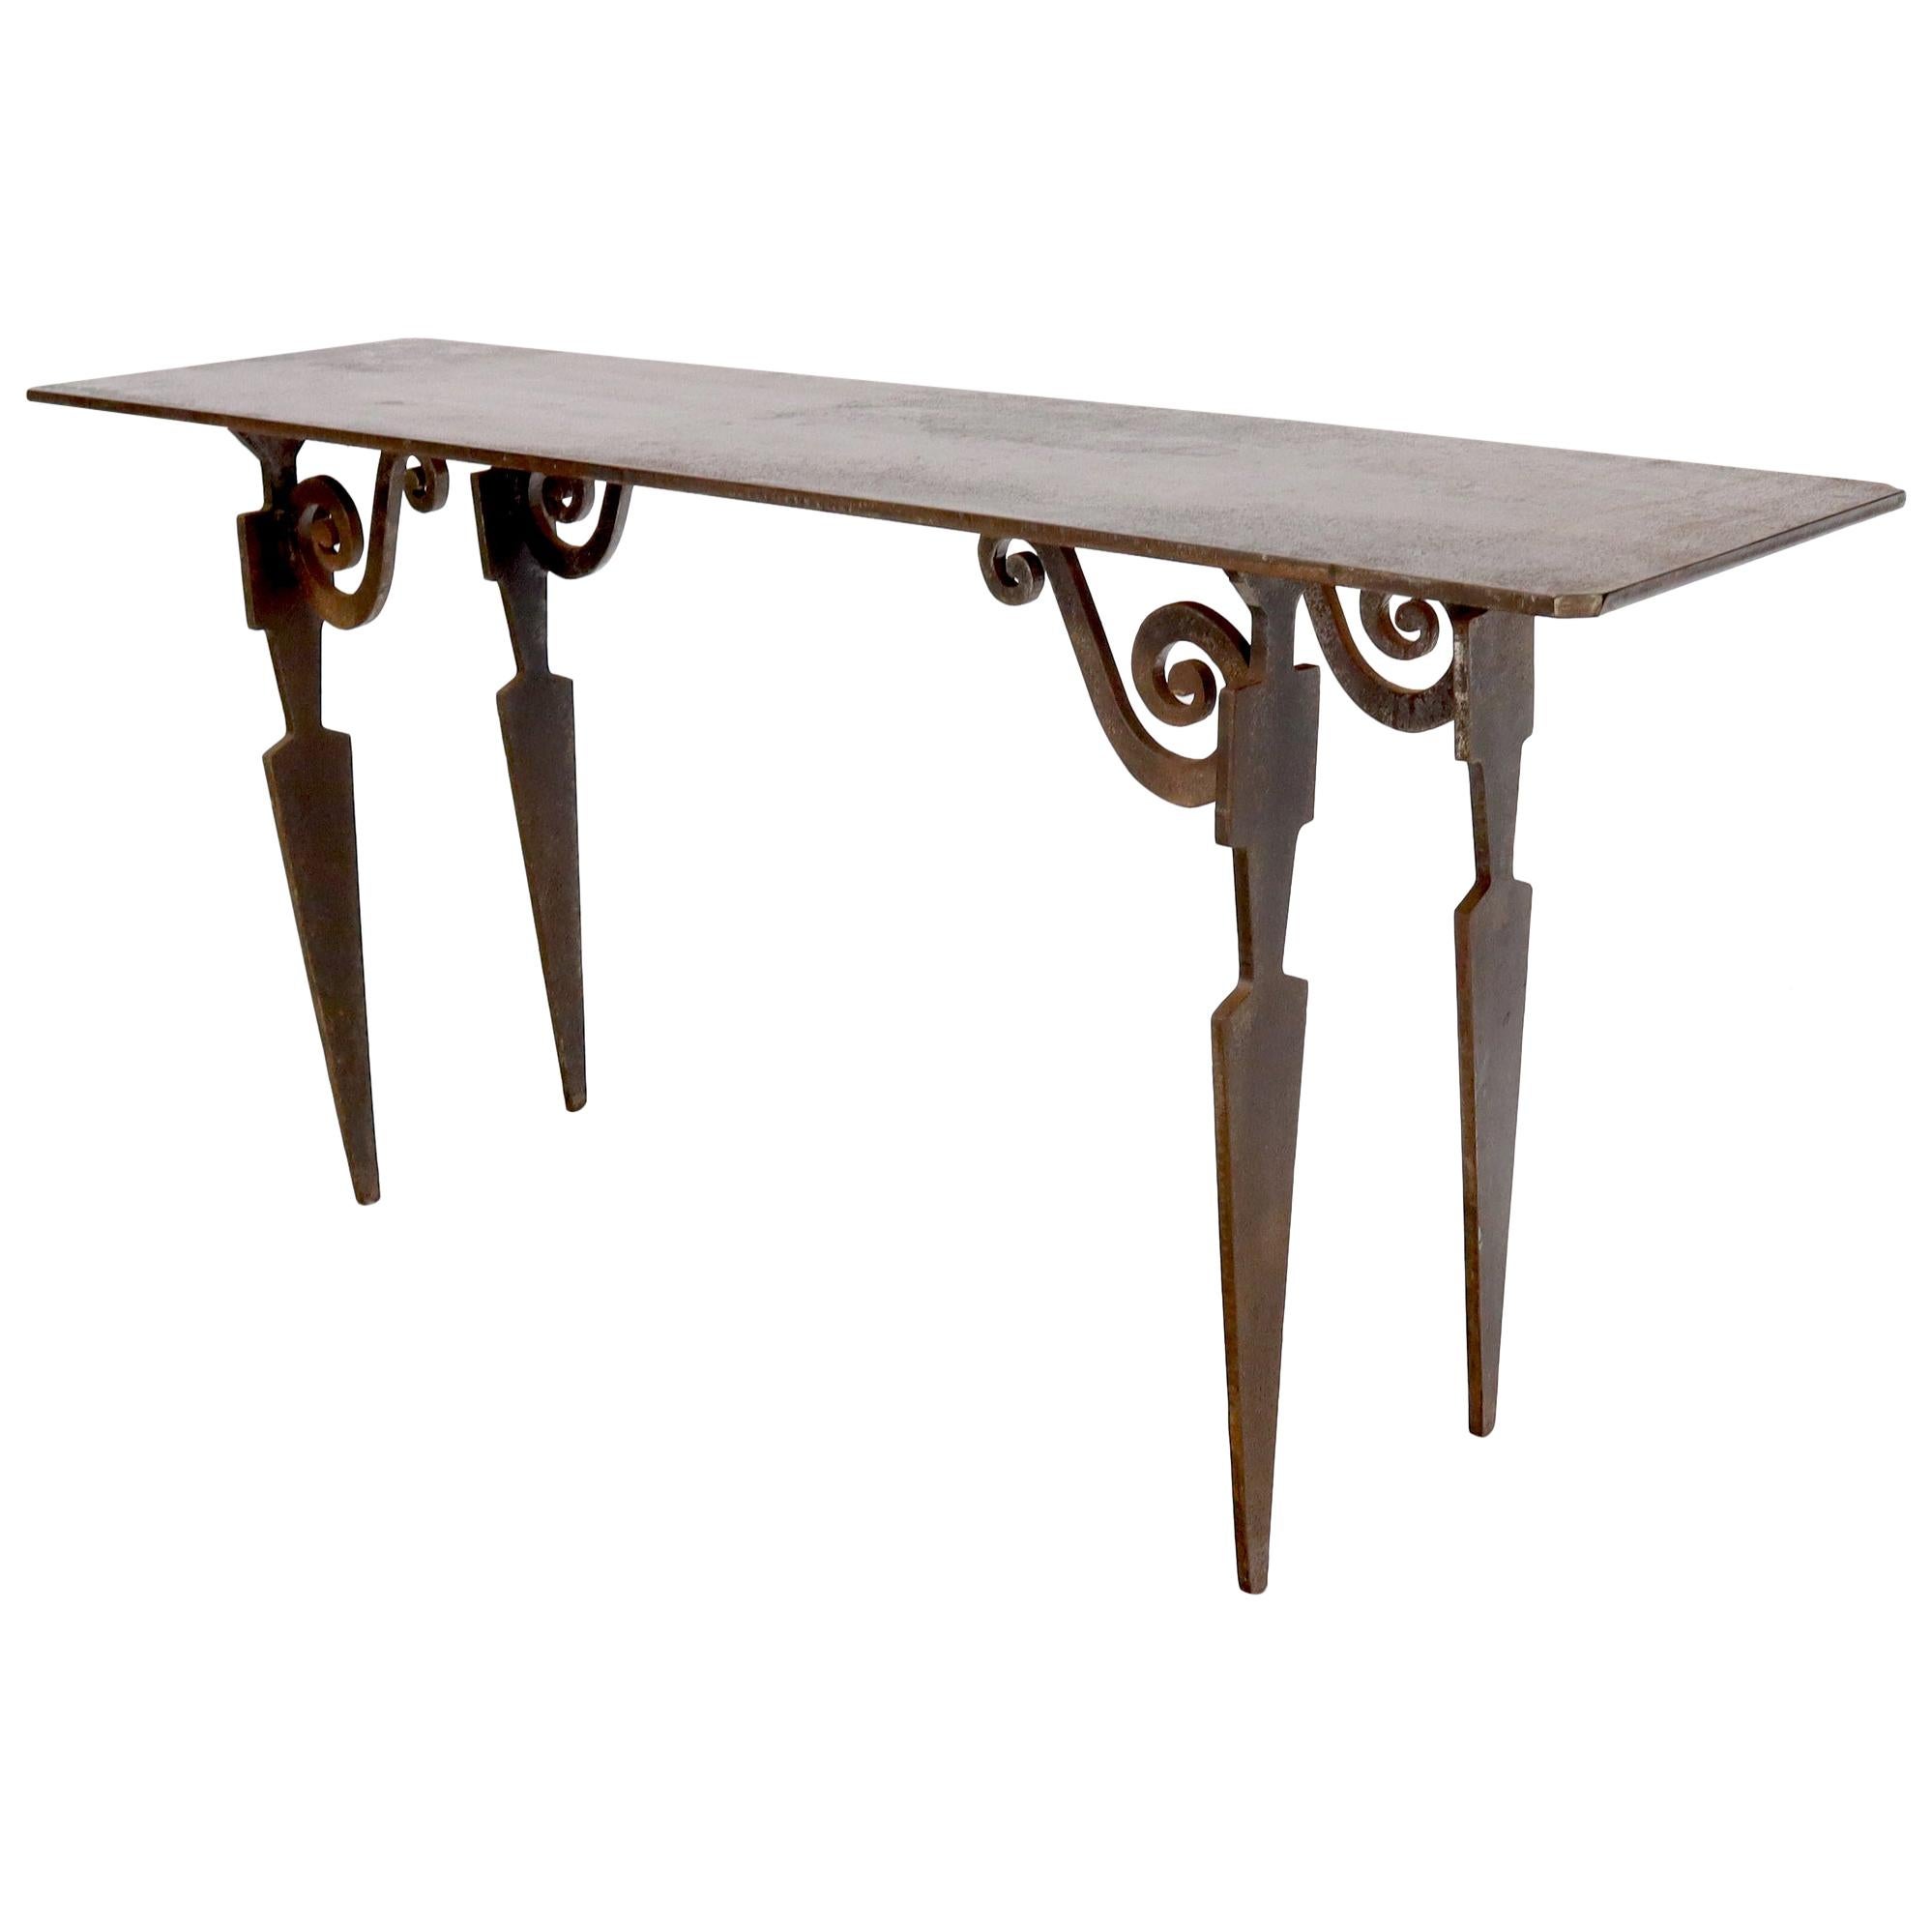 Thick Solid Steel Plate Top Cut Steel Legs Coffee Table Steam Punk Console Table For Sale